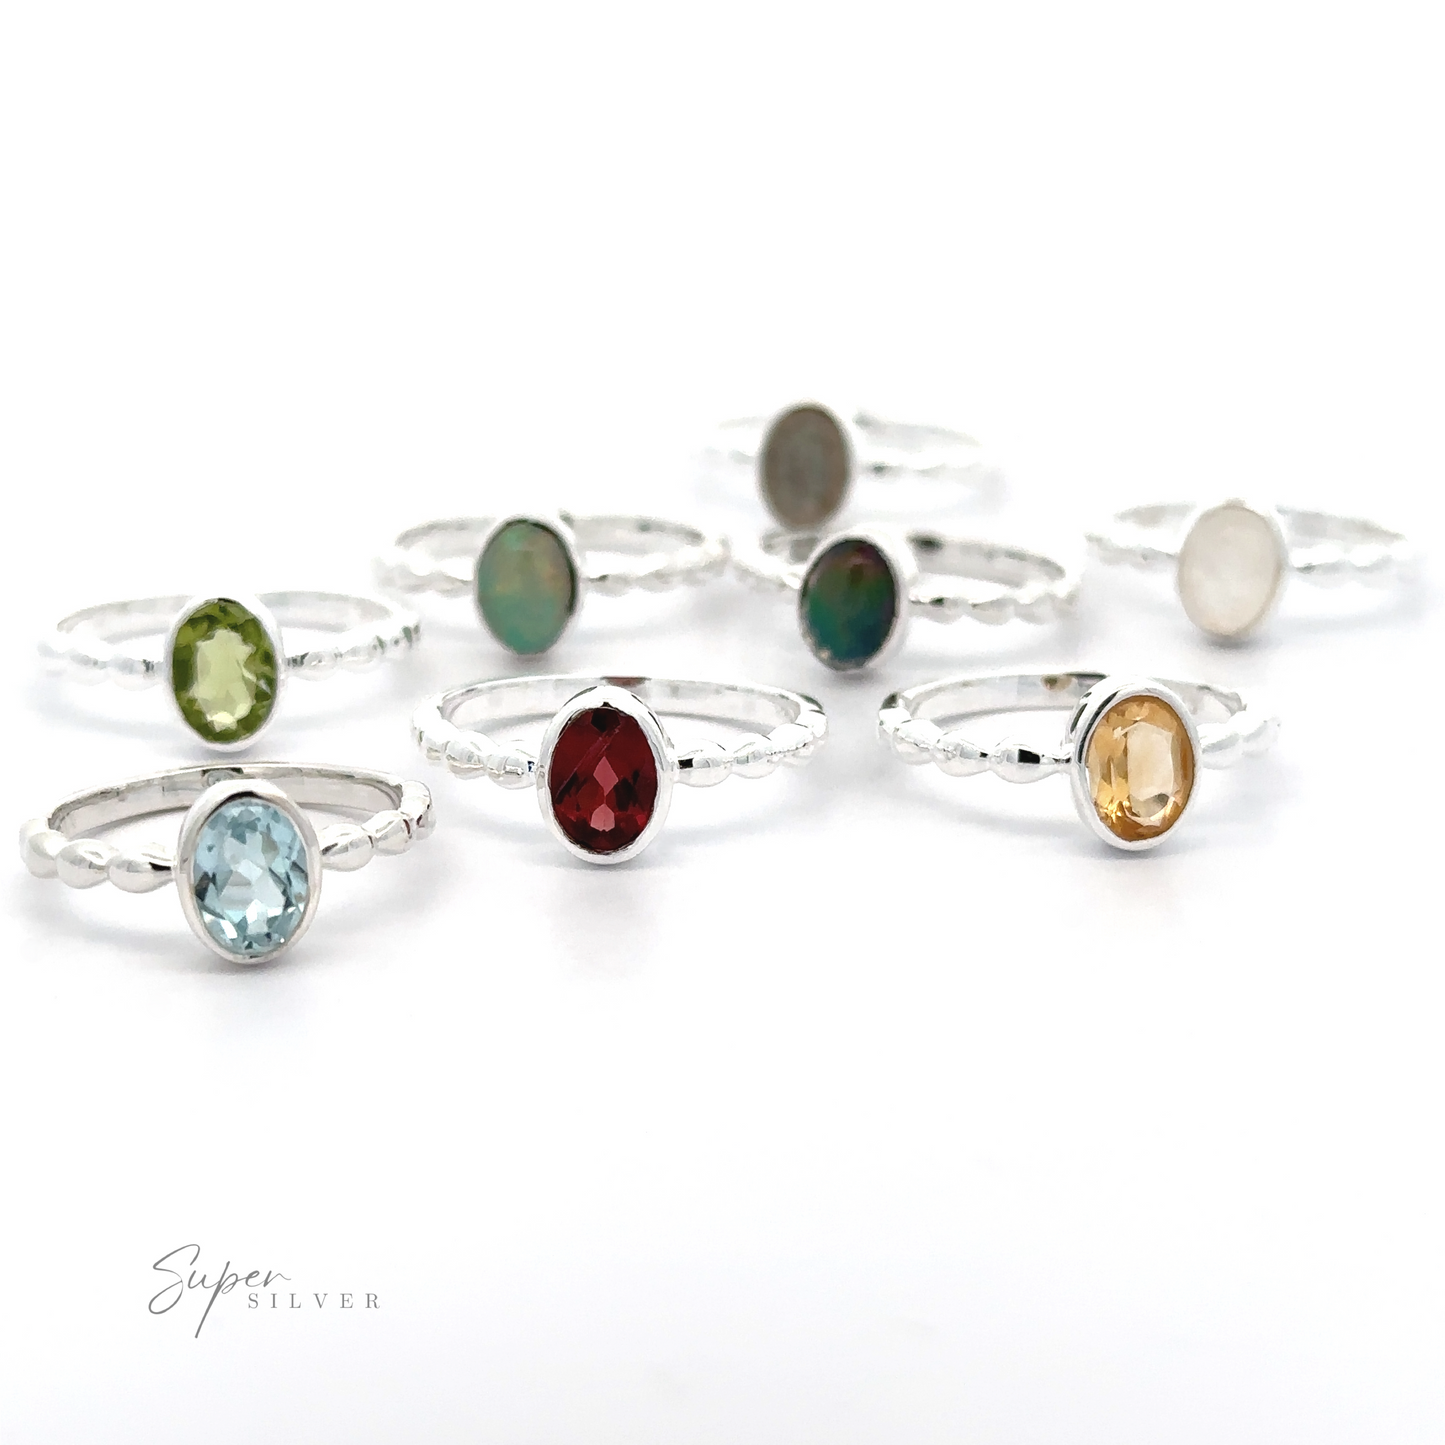 A collection of Oval Gemstone Rings with Beaded Bands displayed on a white background.